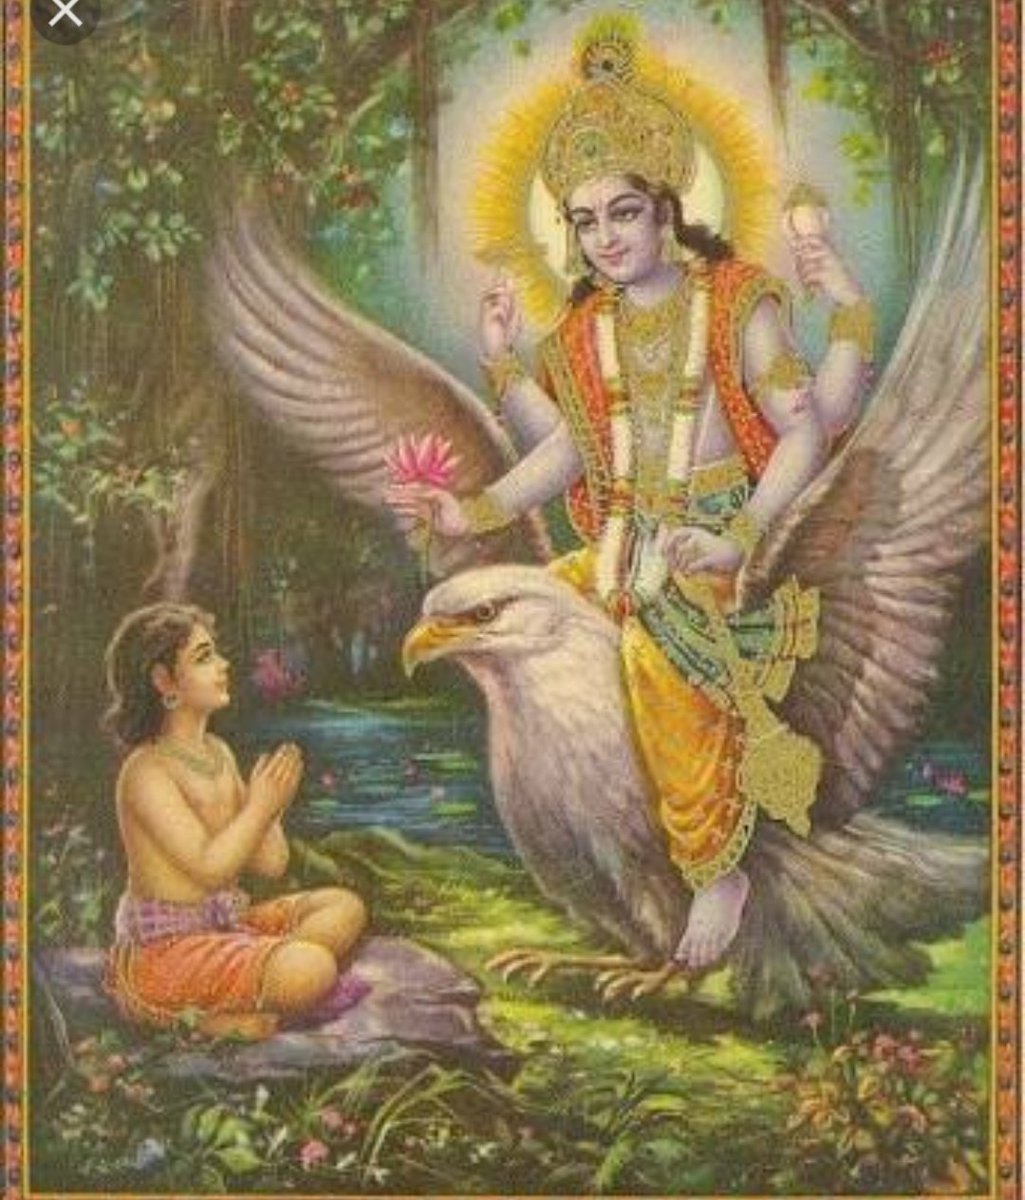 Position. In the forest he met sage Vishwamitra advised him to seek the blessings of lord Keshav by chanting the sacred mantra Om Namo Bhagwate Vasudevay.Dhruva did a careful self punishment and just after 6 months lord Vishnu b3came pleased and appeared before him mounted